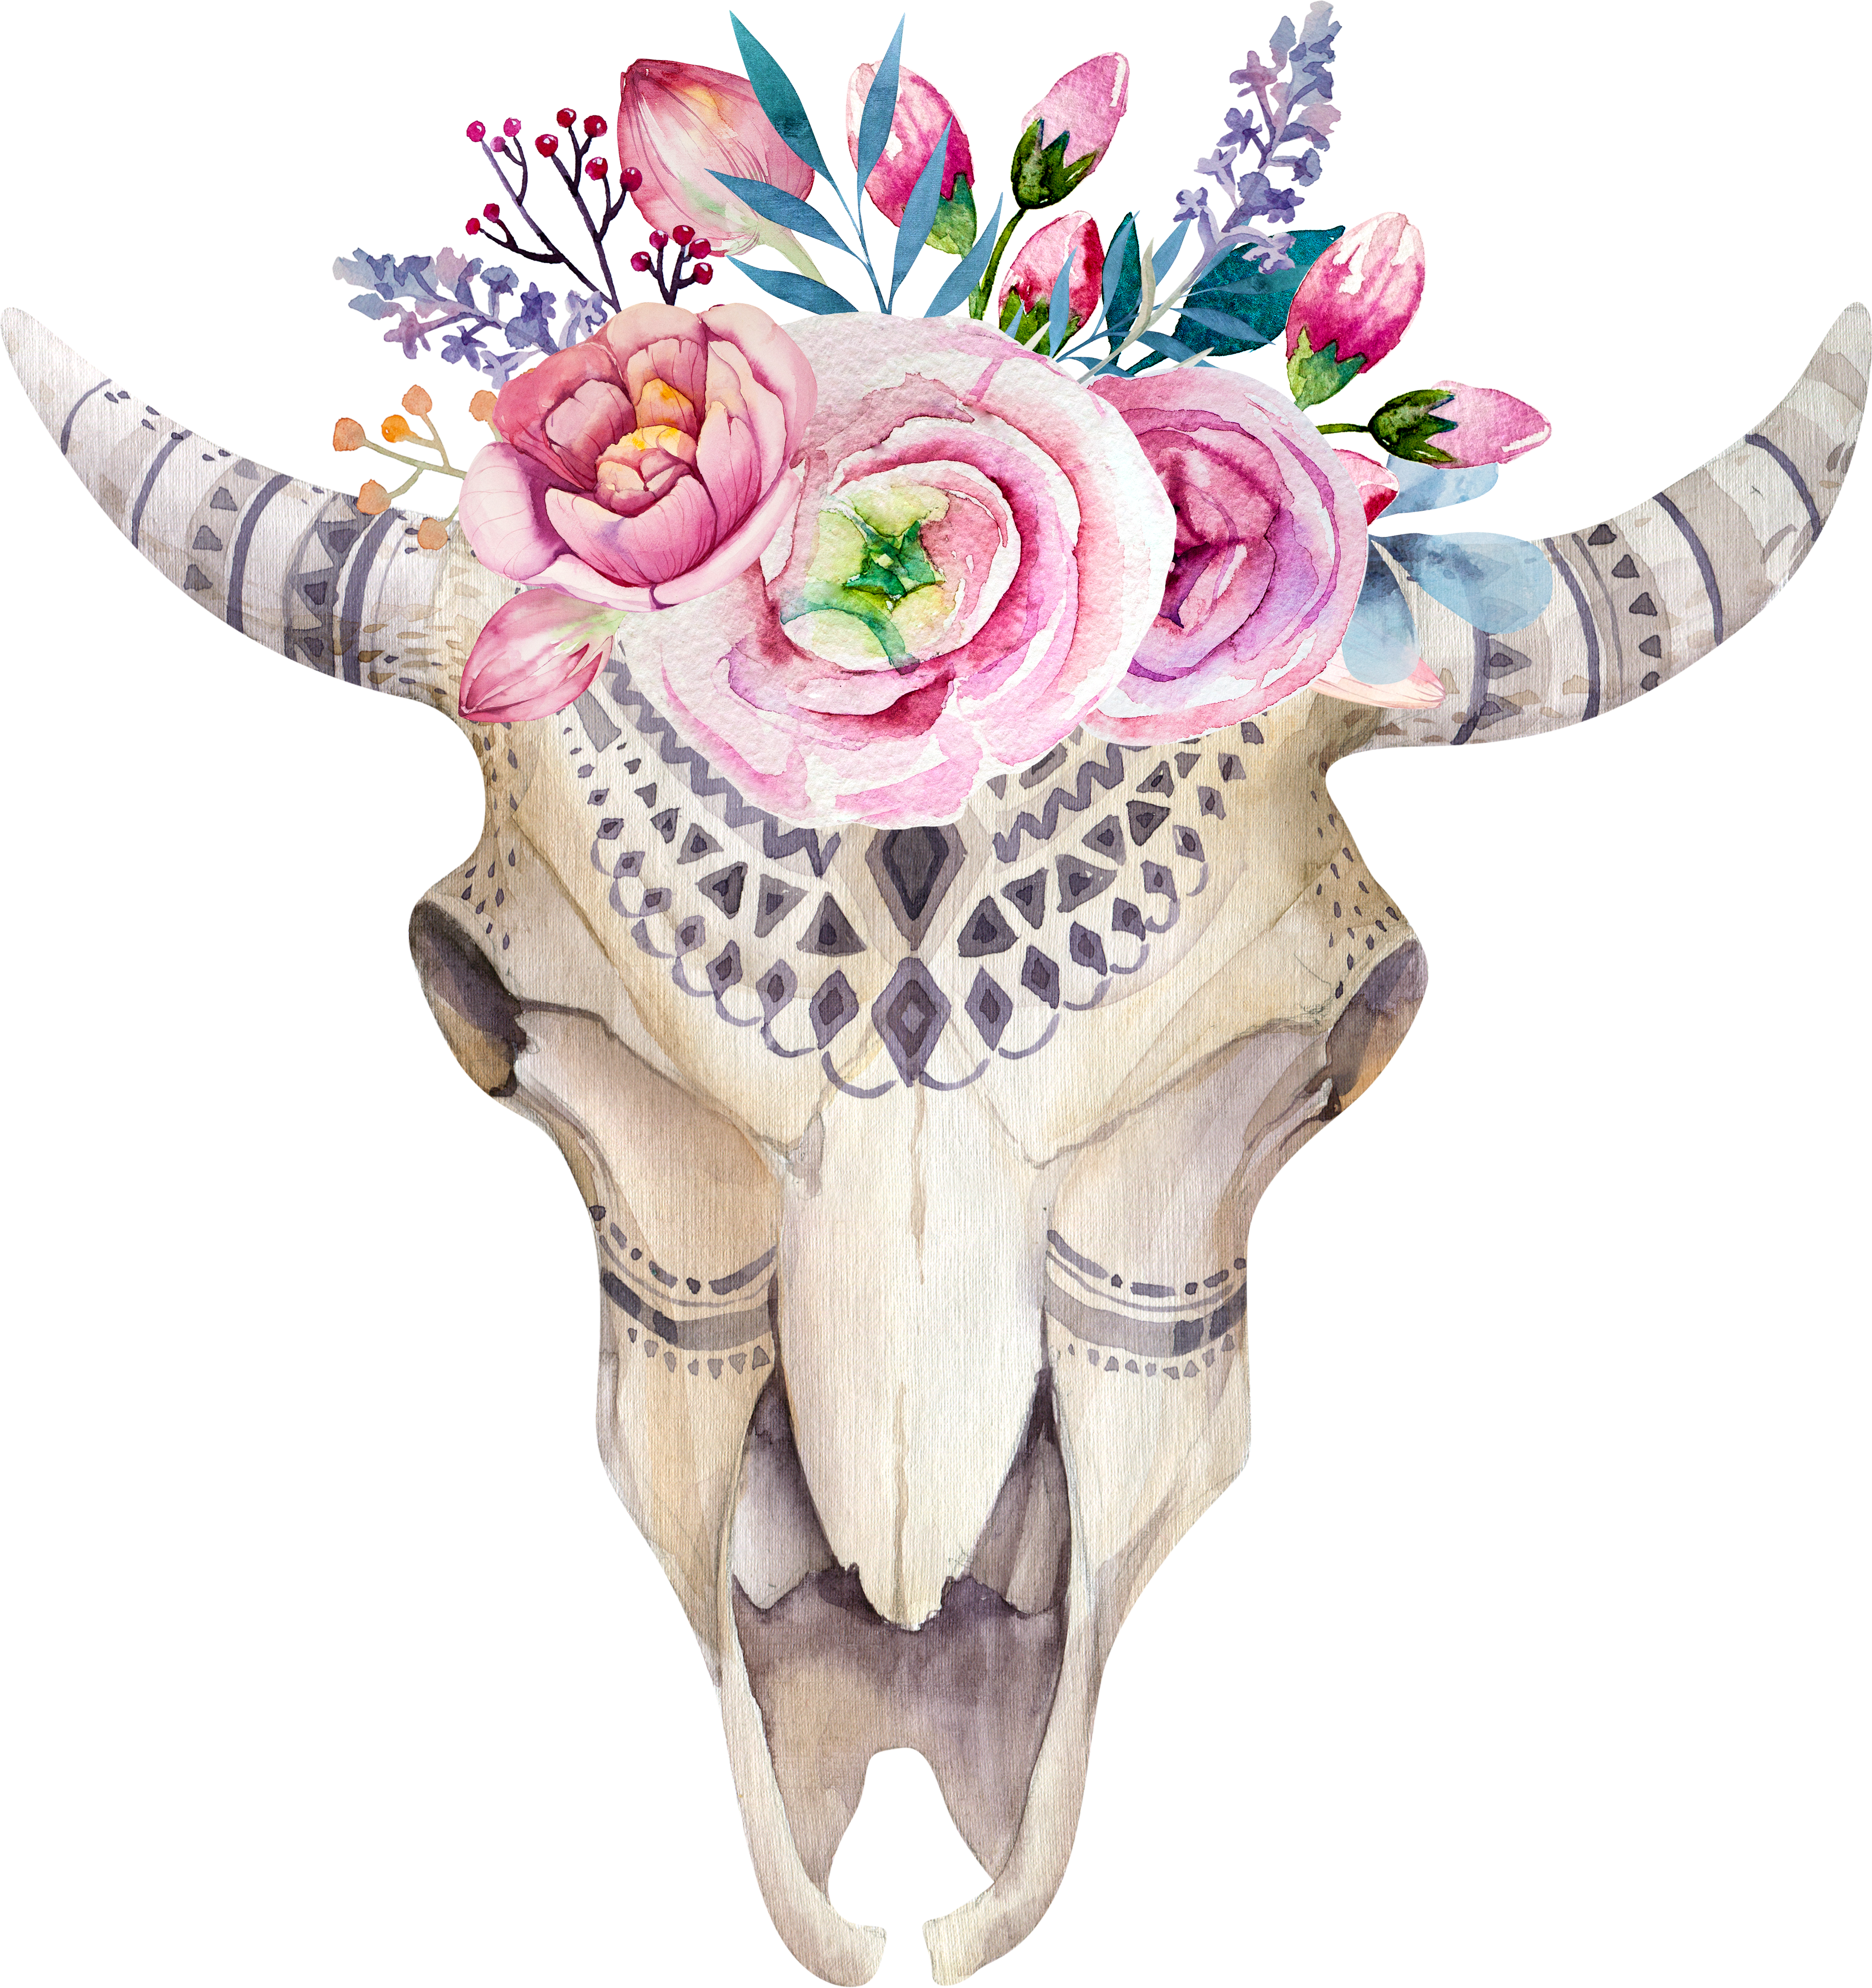 Watercolor Flower Skull Boho-Chic Painted Pattern Illustration Clipart